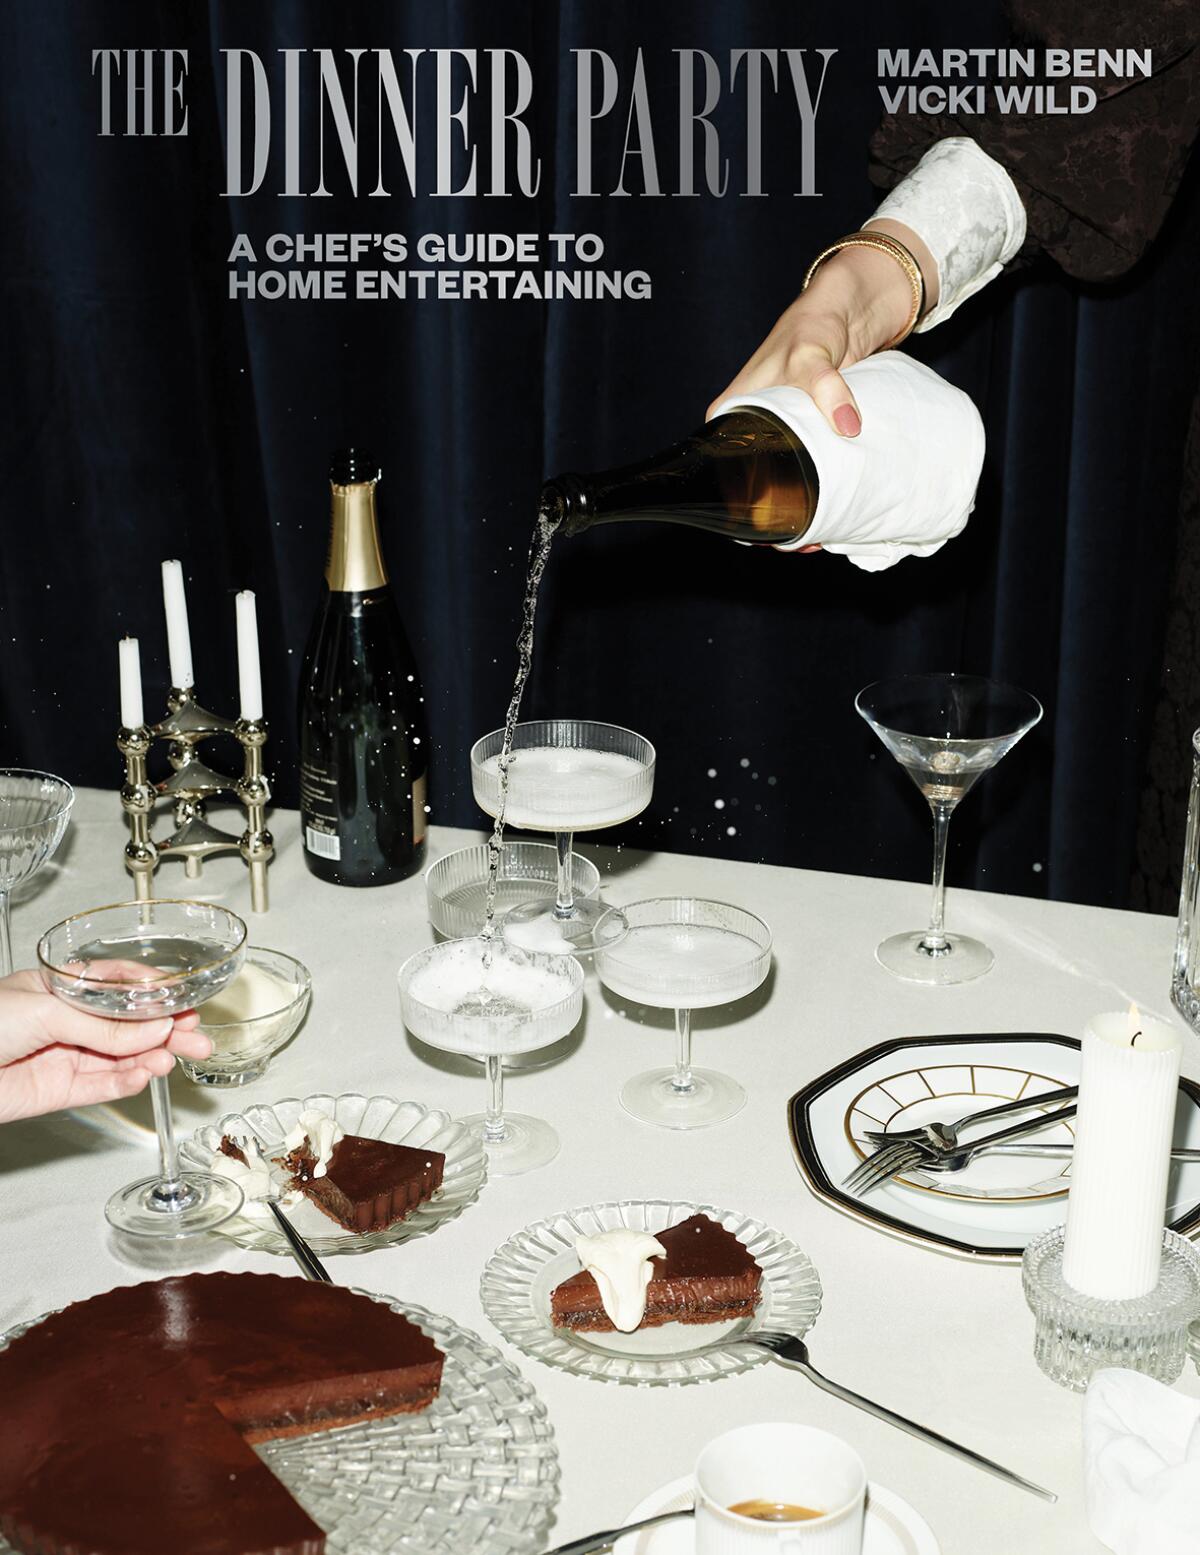 The cover of "The Dinner Party" cookbook: A hand from off camera pours champagne next to a chocolate cake